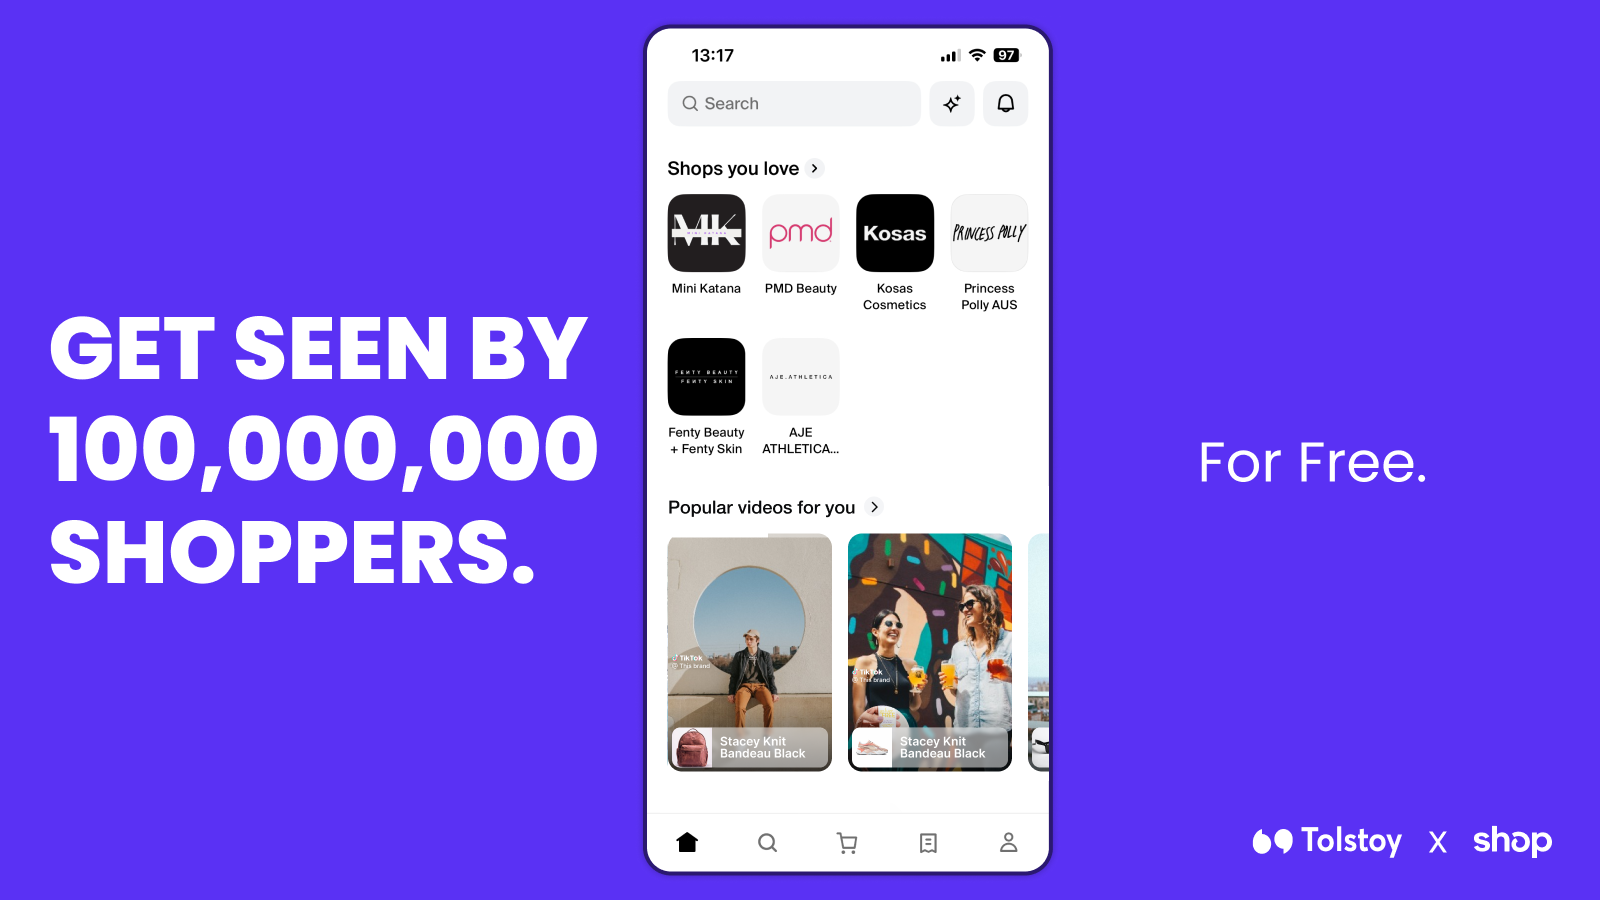 Shop Videos. Get seen by 100,000,000 shoppers, for free.